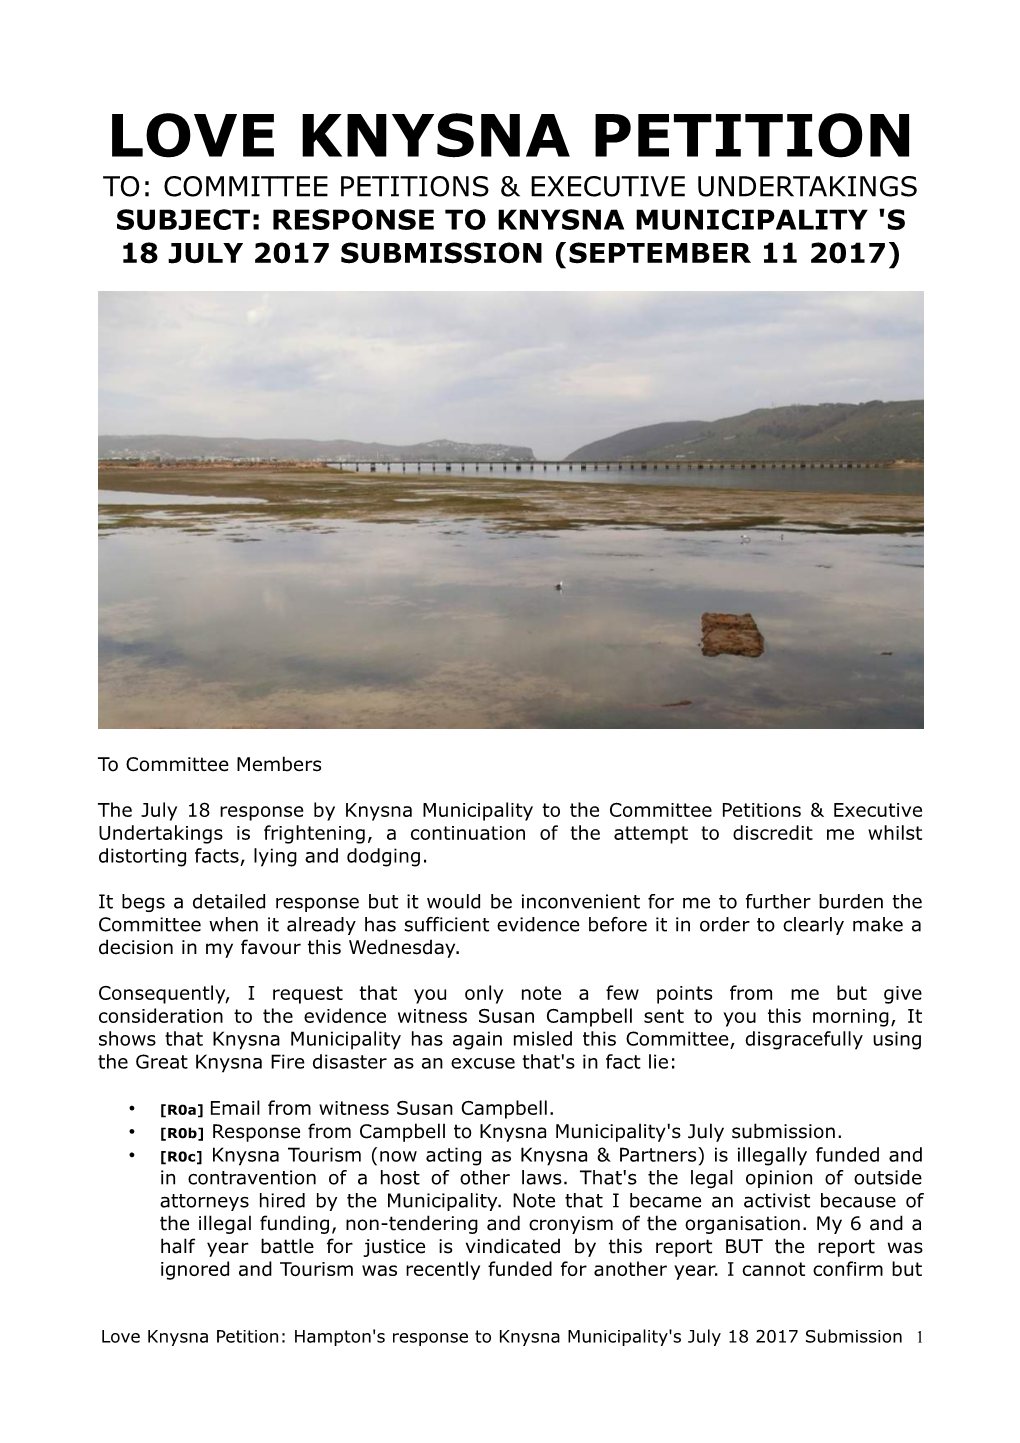 Love Knysna Petition To: Committee Petitions & Executive Undertakings Subject: Response to Knysna Municipality 'S 18 July 2017 Submission (September 11 2017)